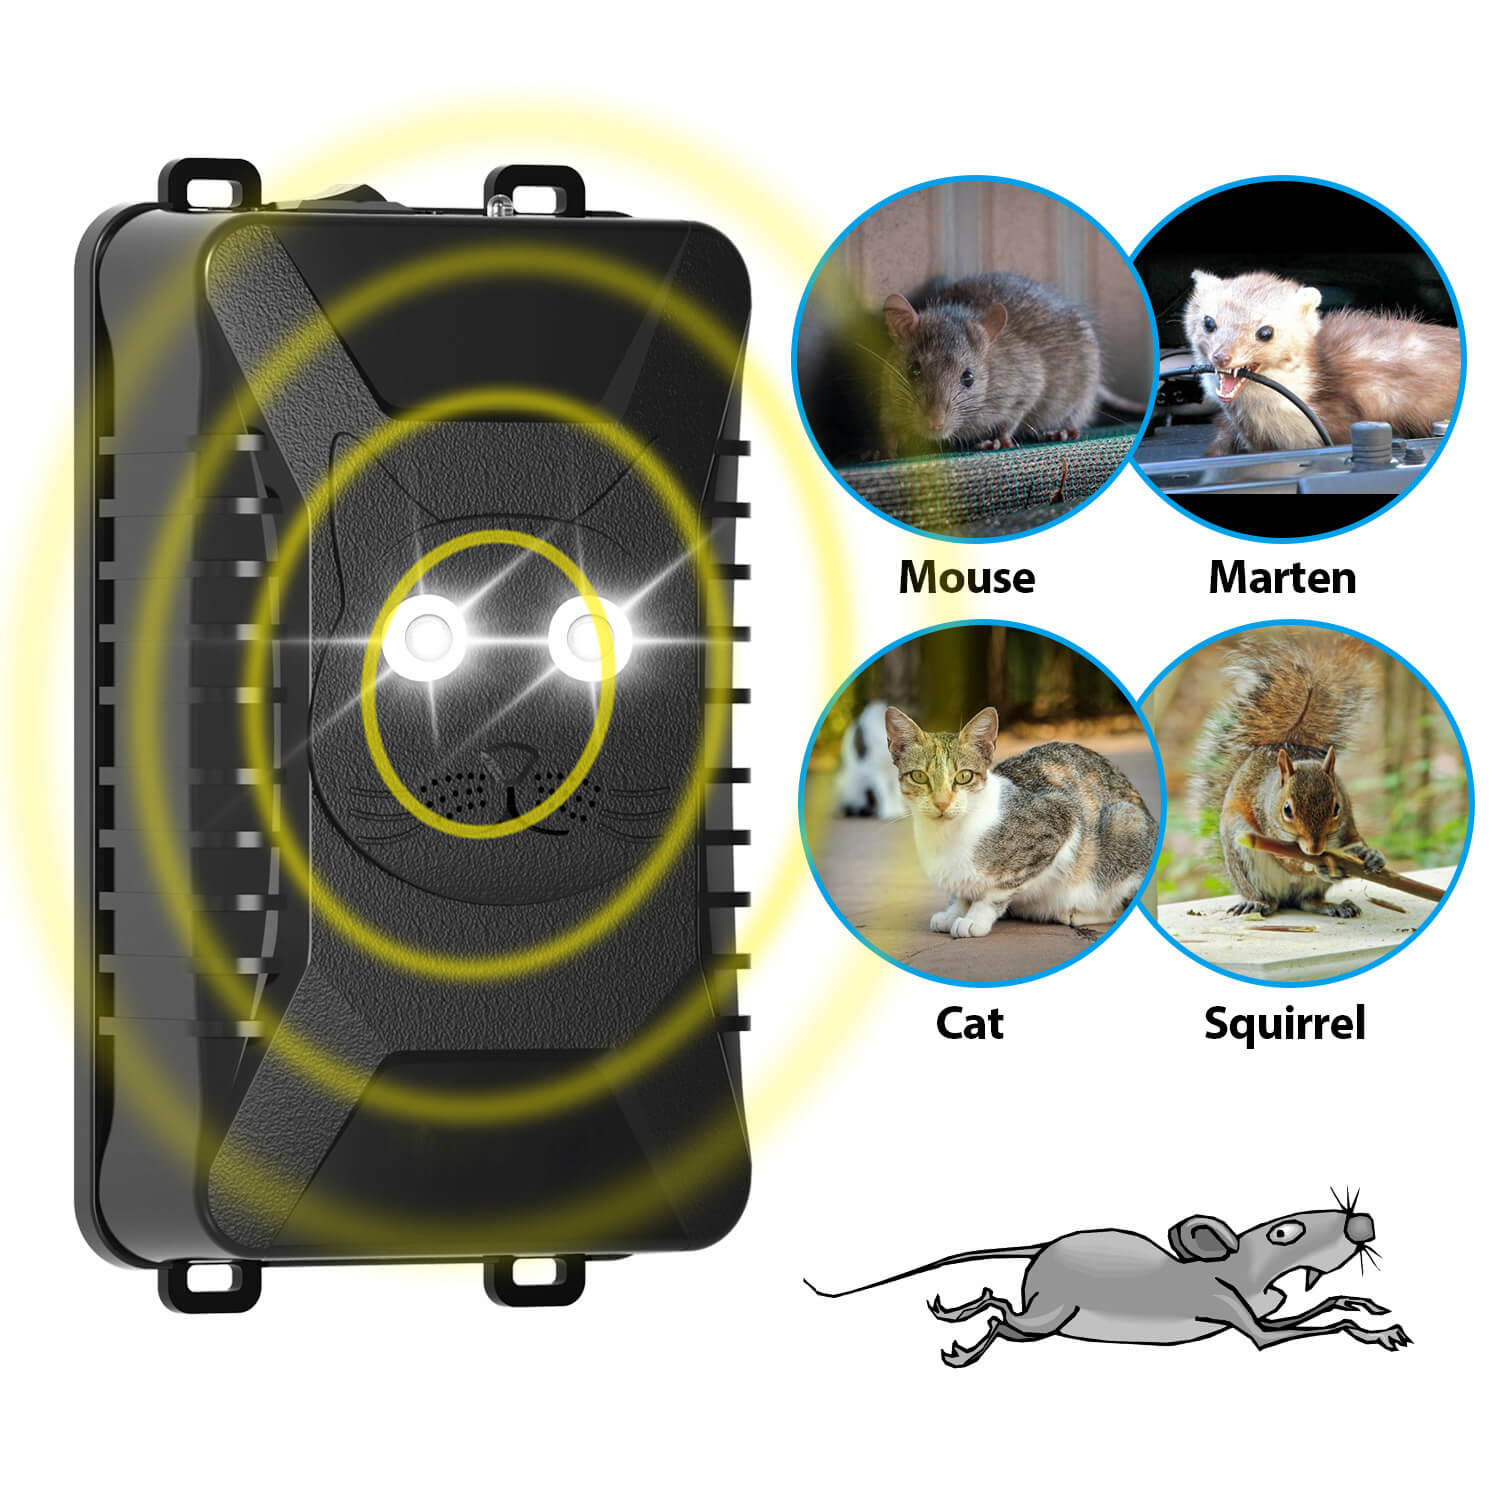 Battery Operated Under hood Animal Repellent -China Manufacturer